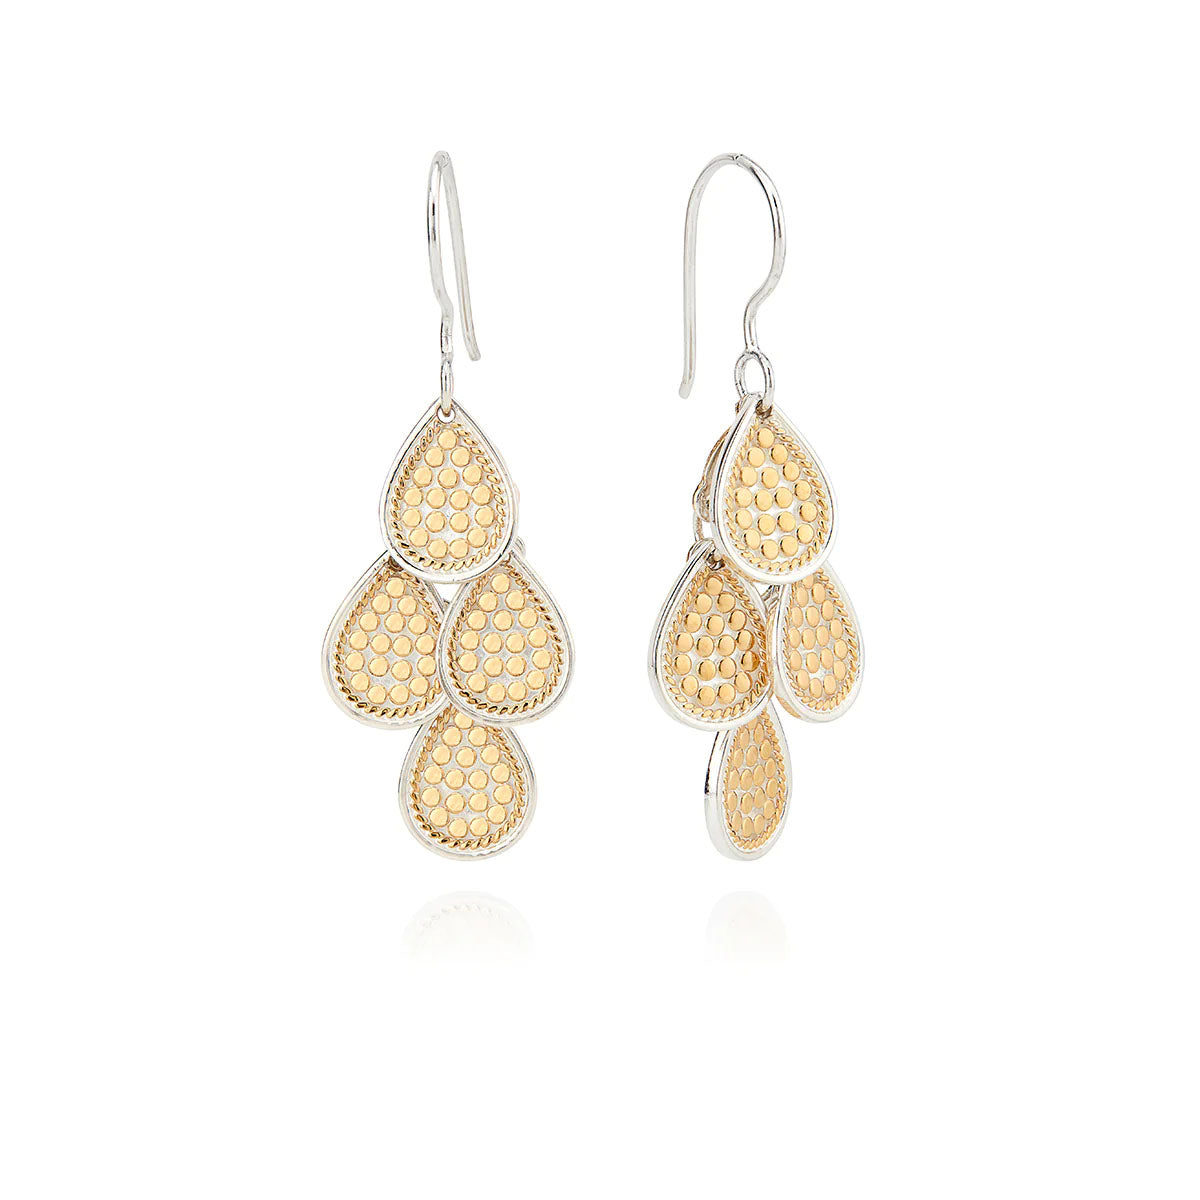 Anna Beck Classic Chandelier Earrings - Gold 